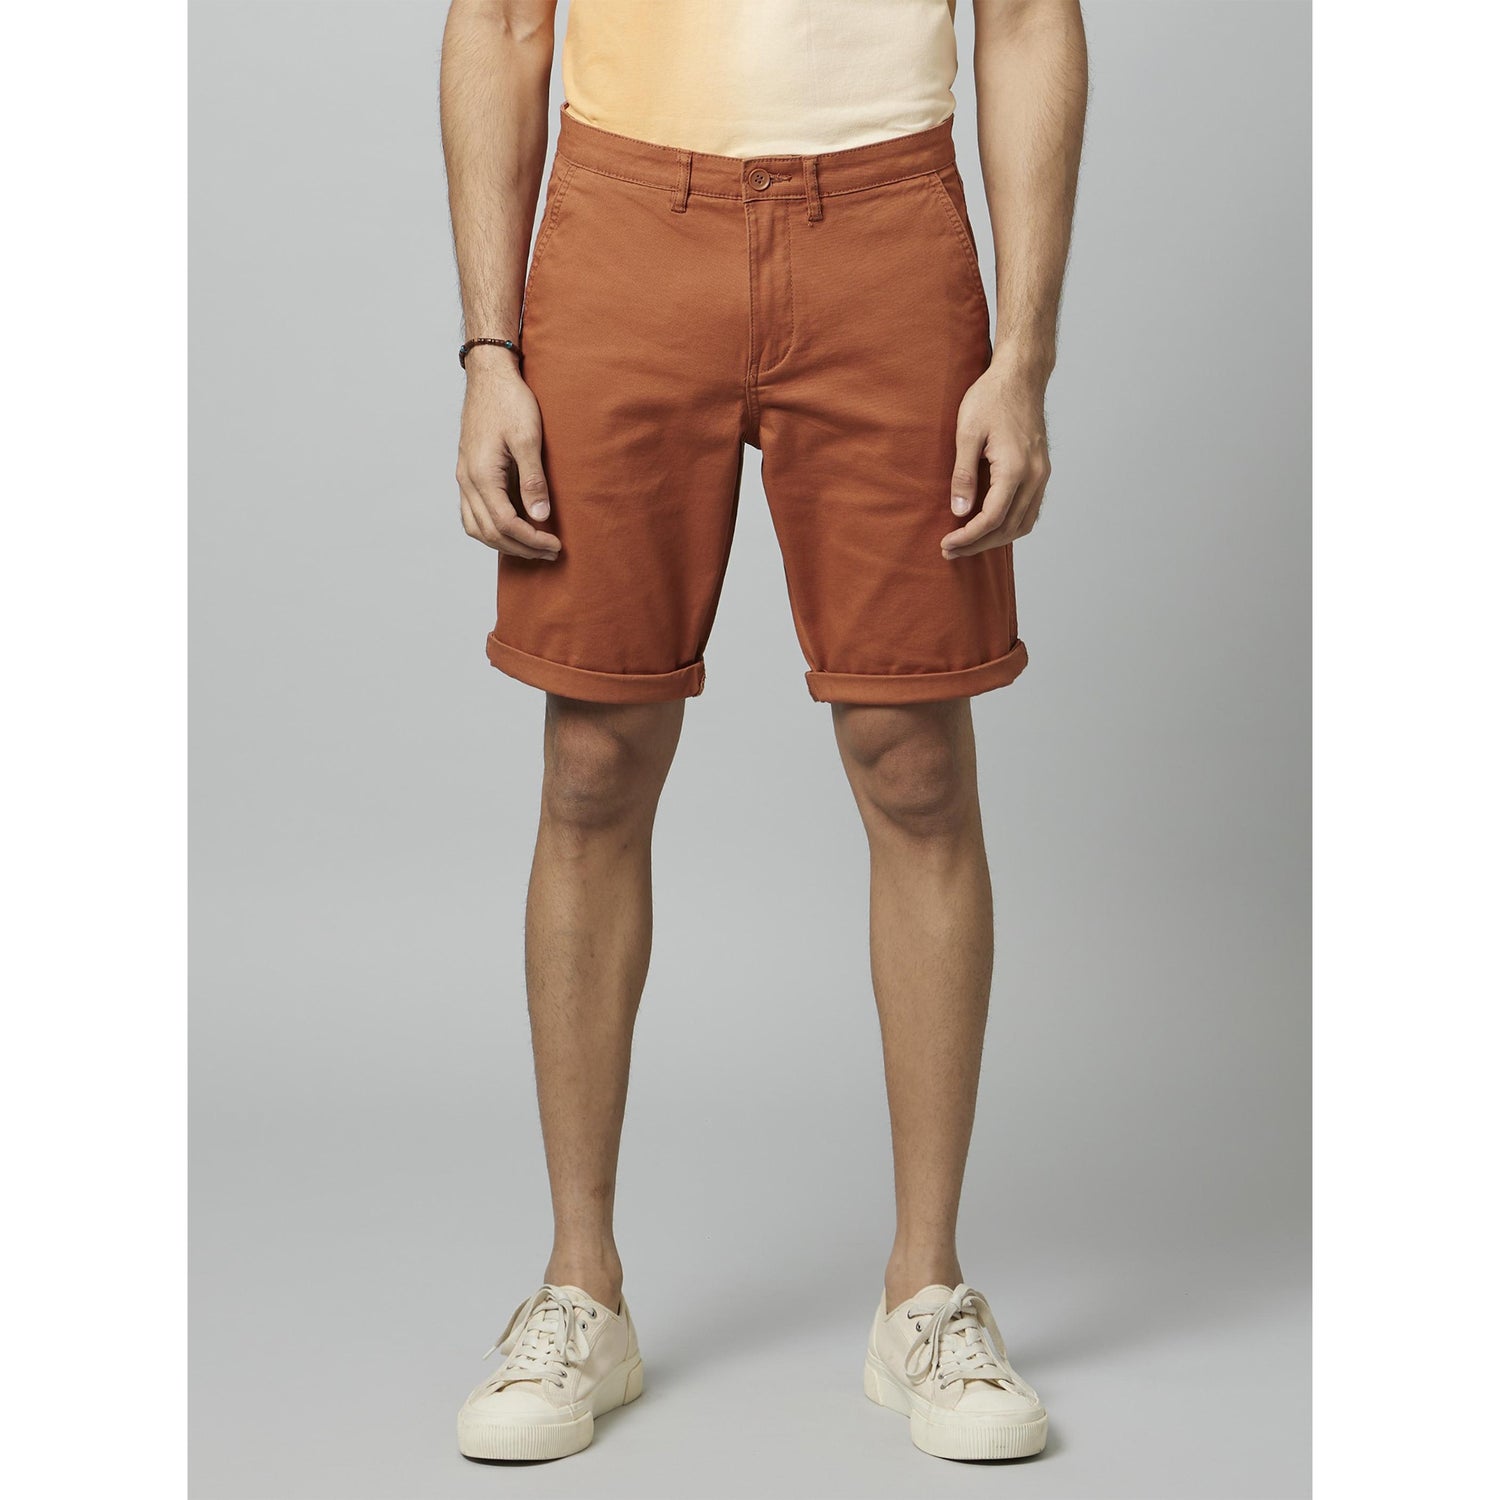 Solid Rust Cotton Chino Shorts